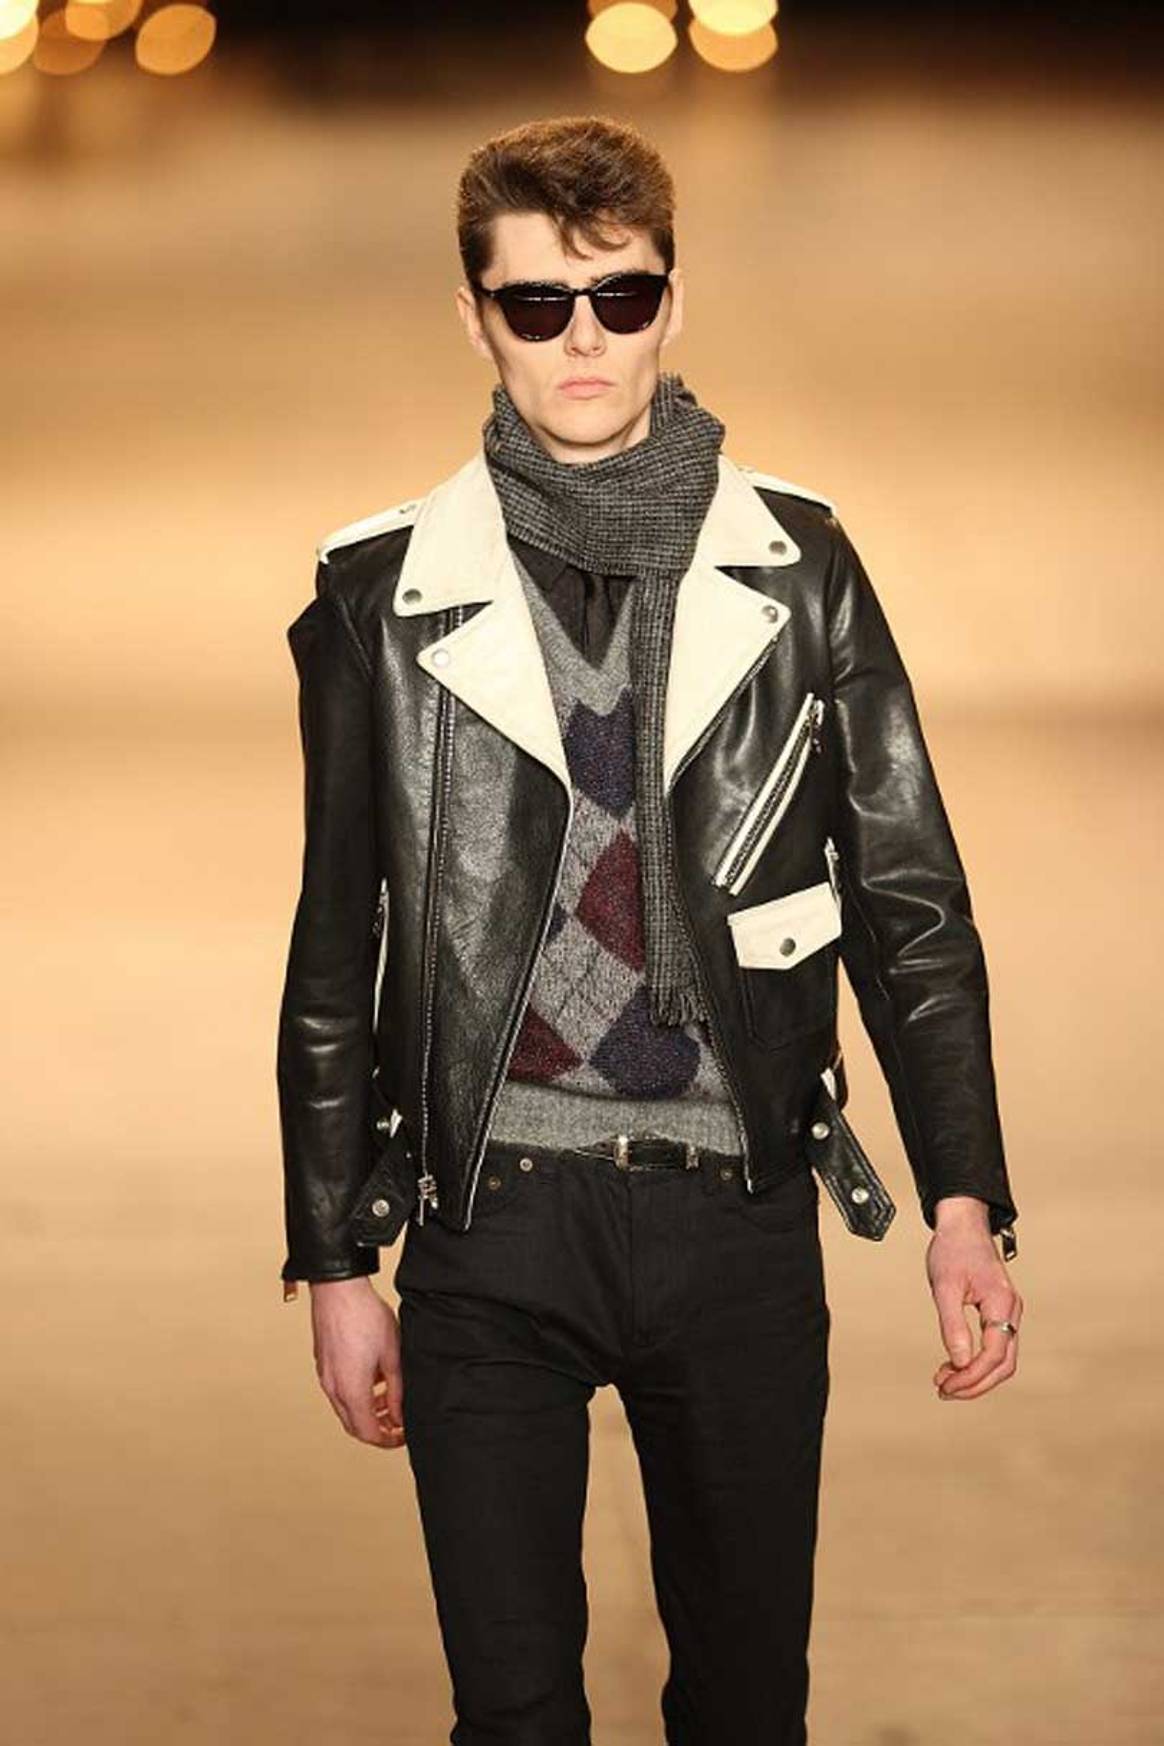 What can we expect from Hedi Slimane and Céline’s new menswear?